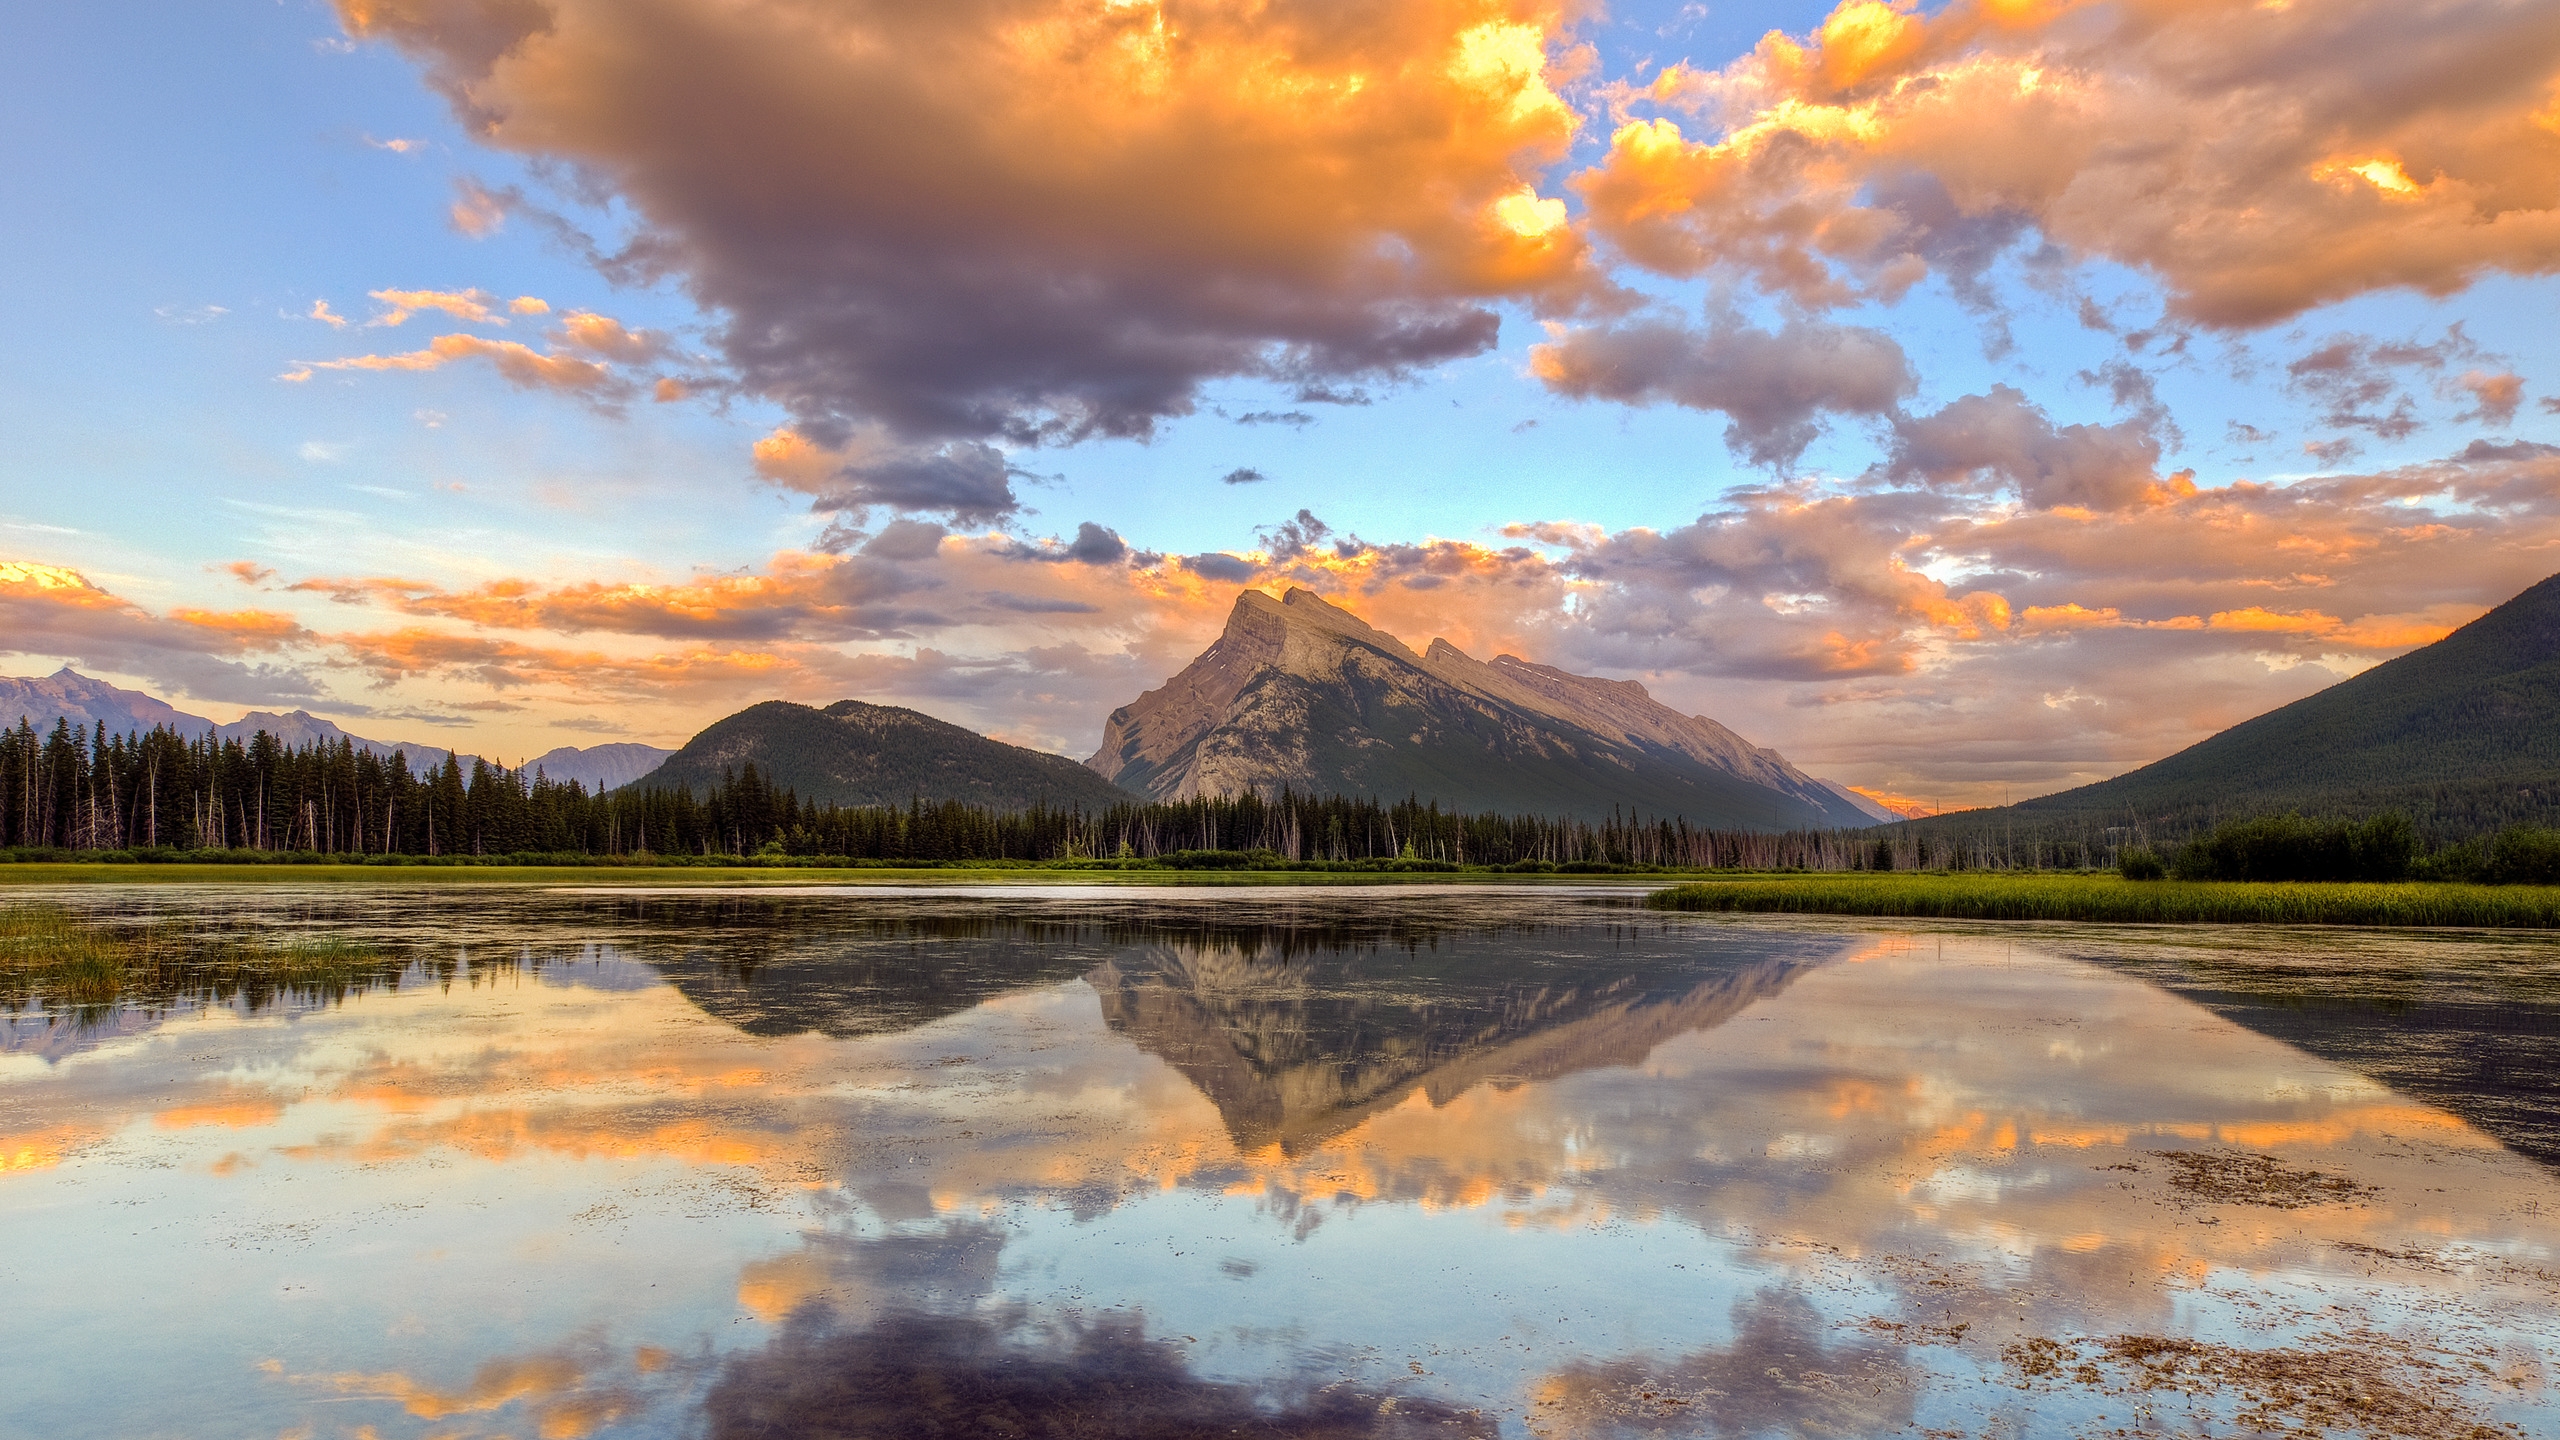 Rundle Mountain for 2560x1440 HDTV resolution